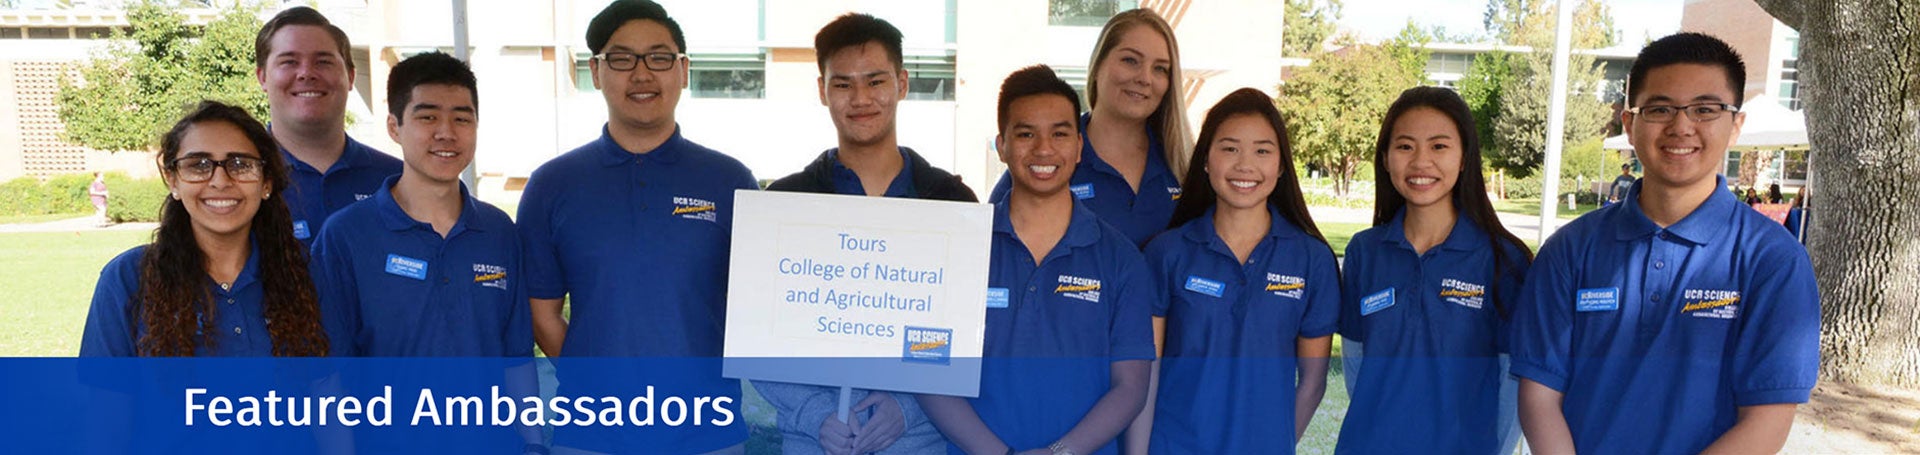 Science Ambassadors ready to give campus tours